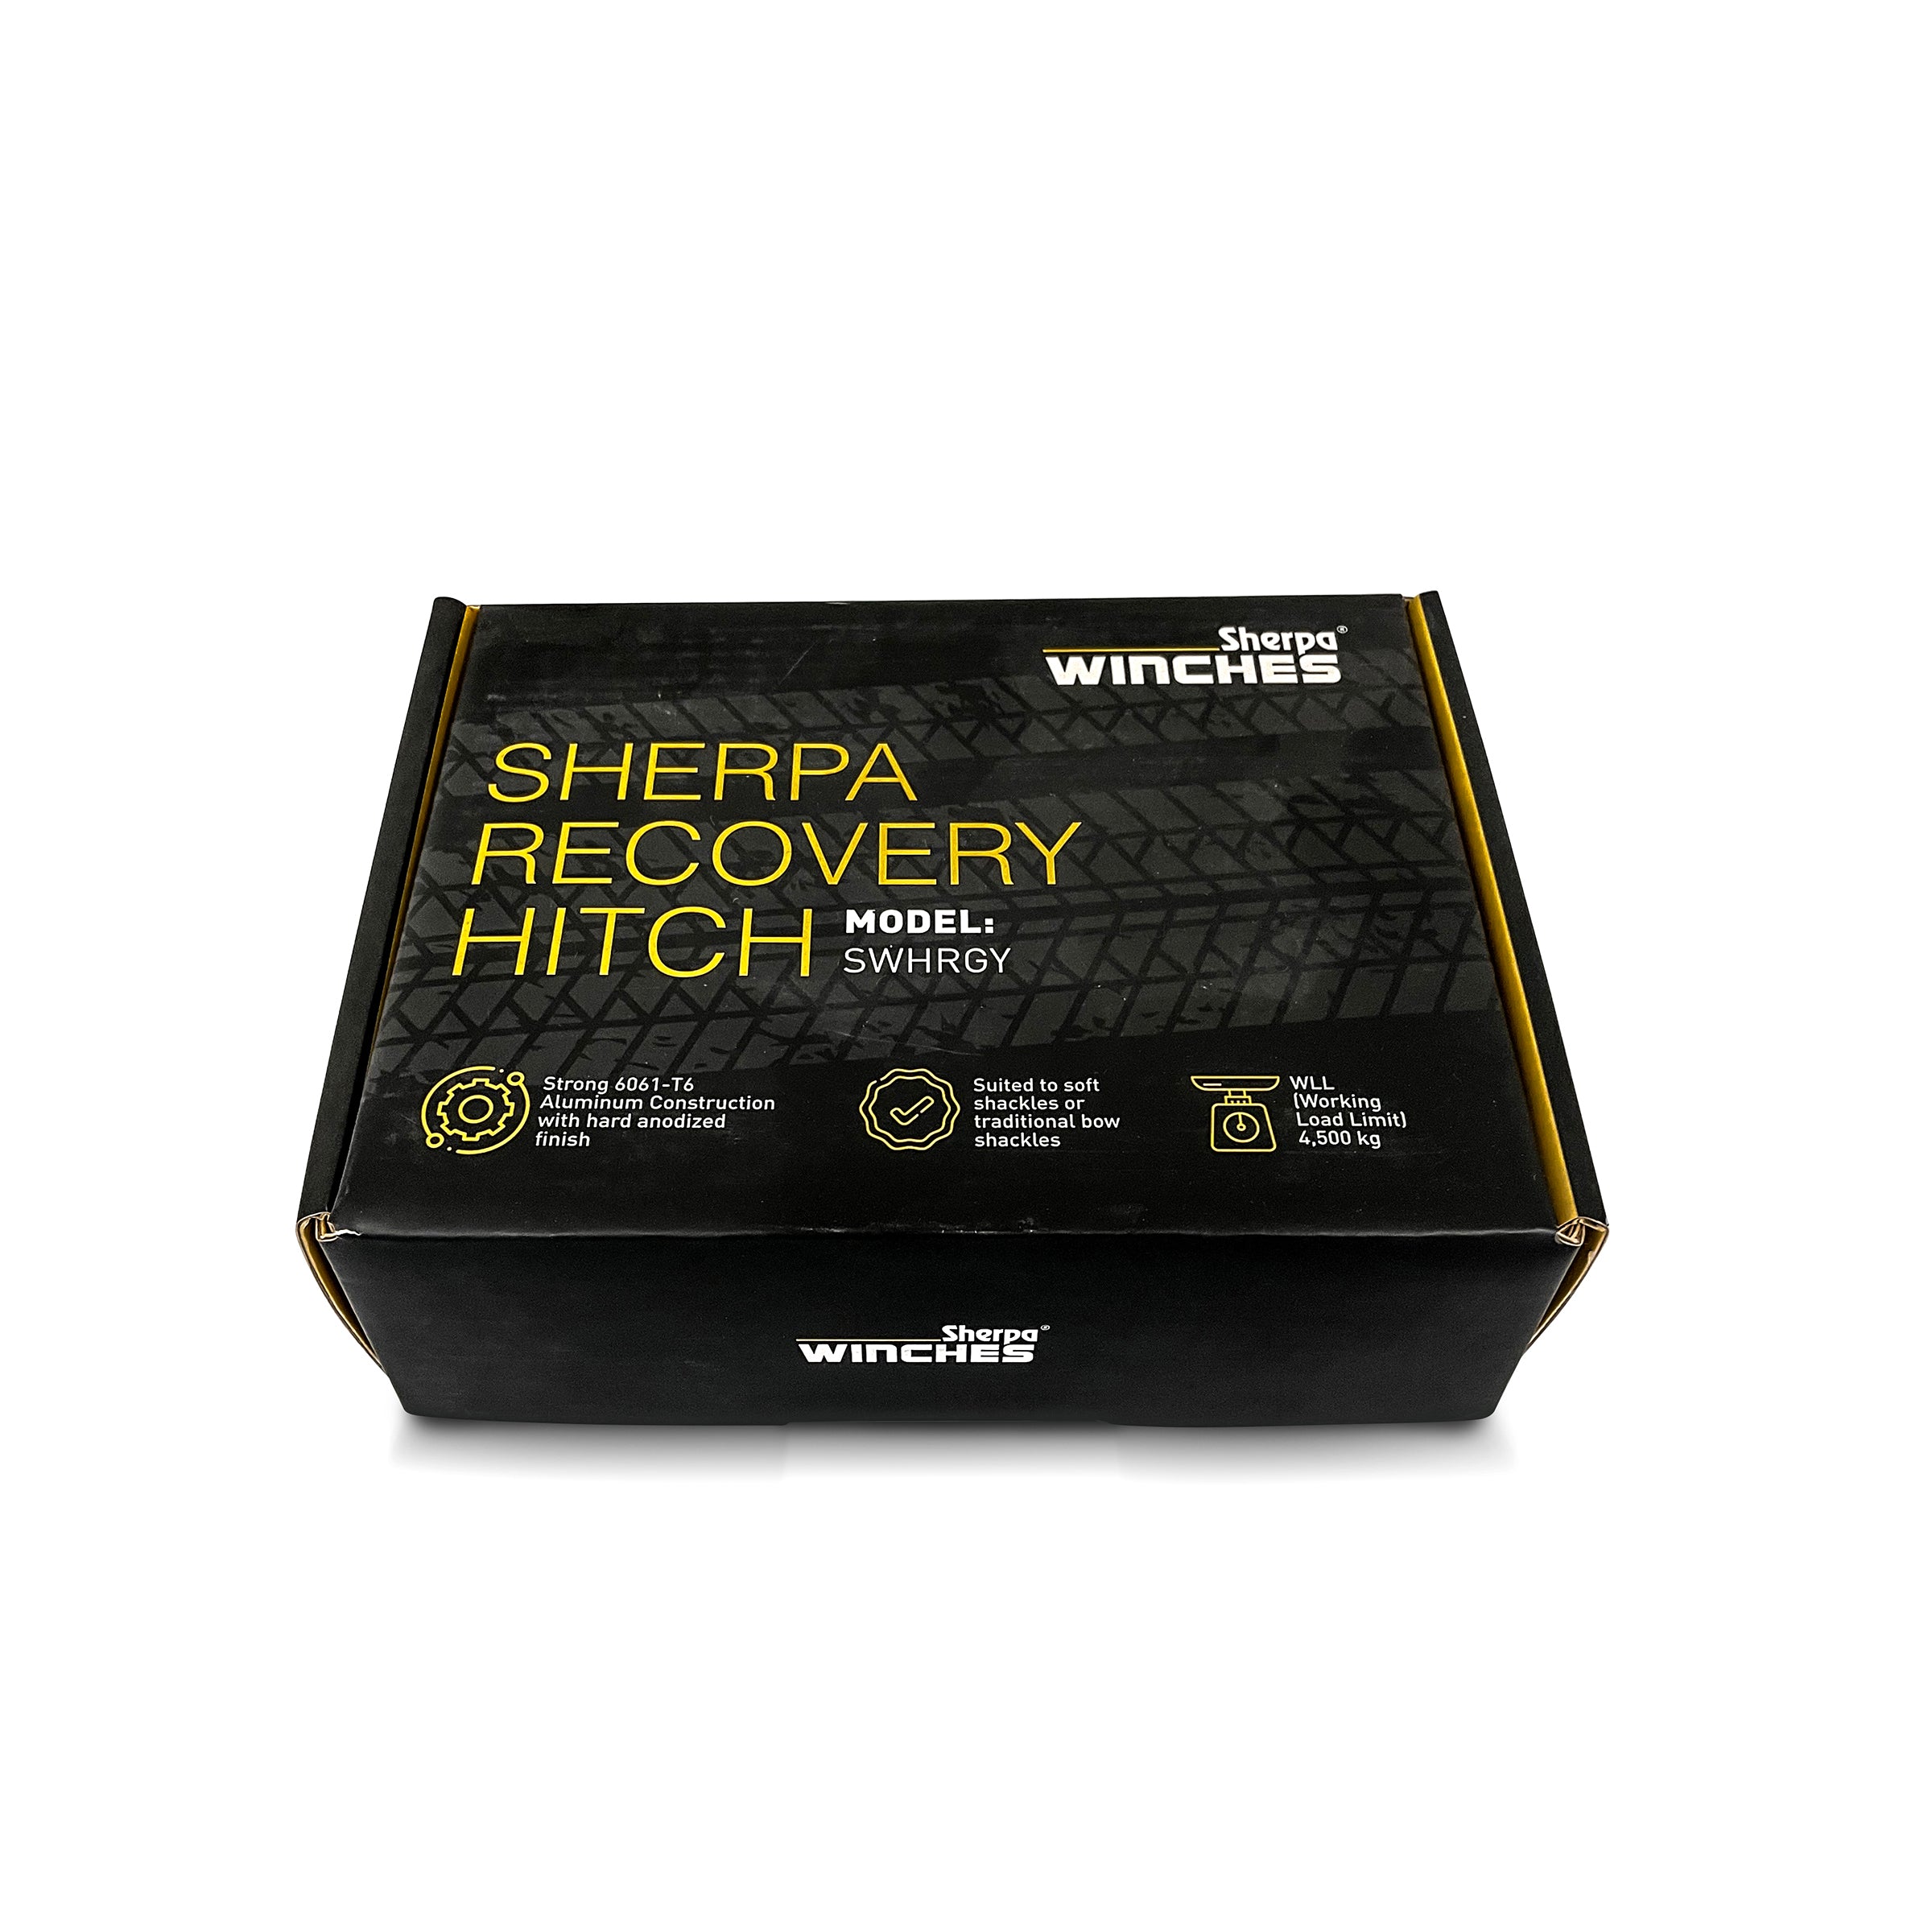 Sherpa 4x4 recovery hitch for tow bar receiver